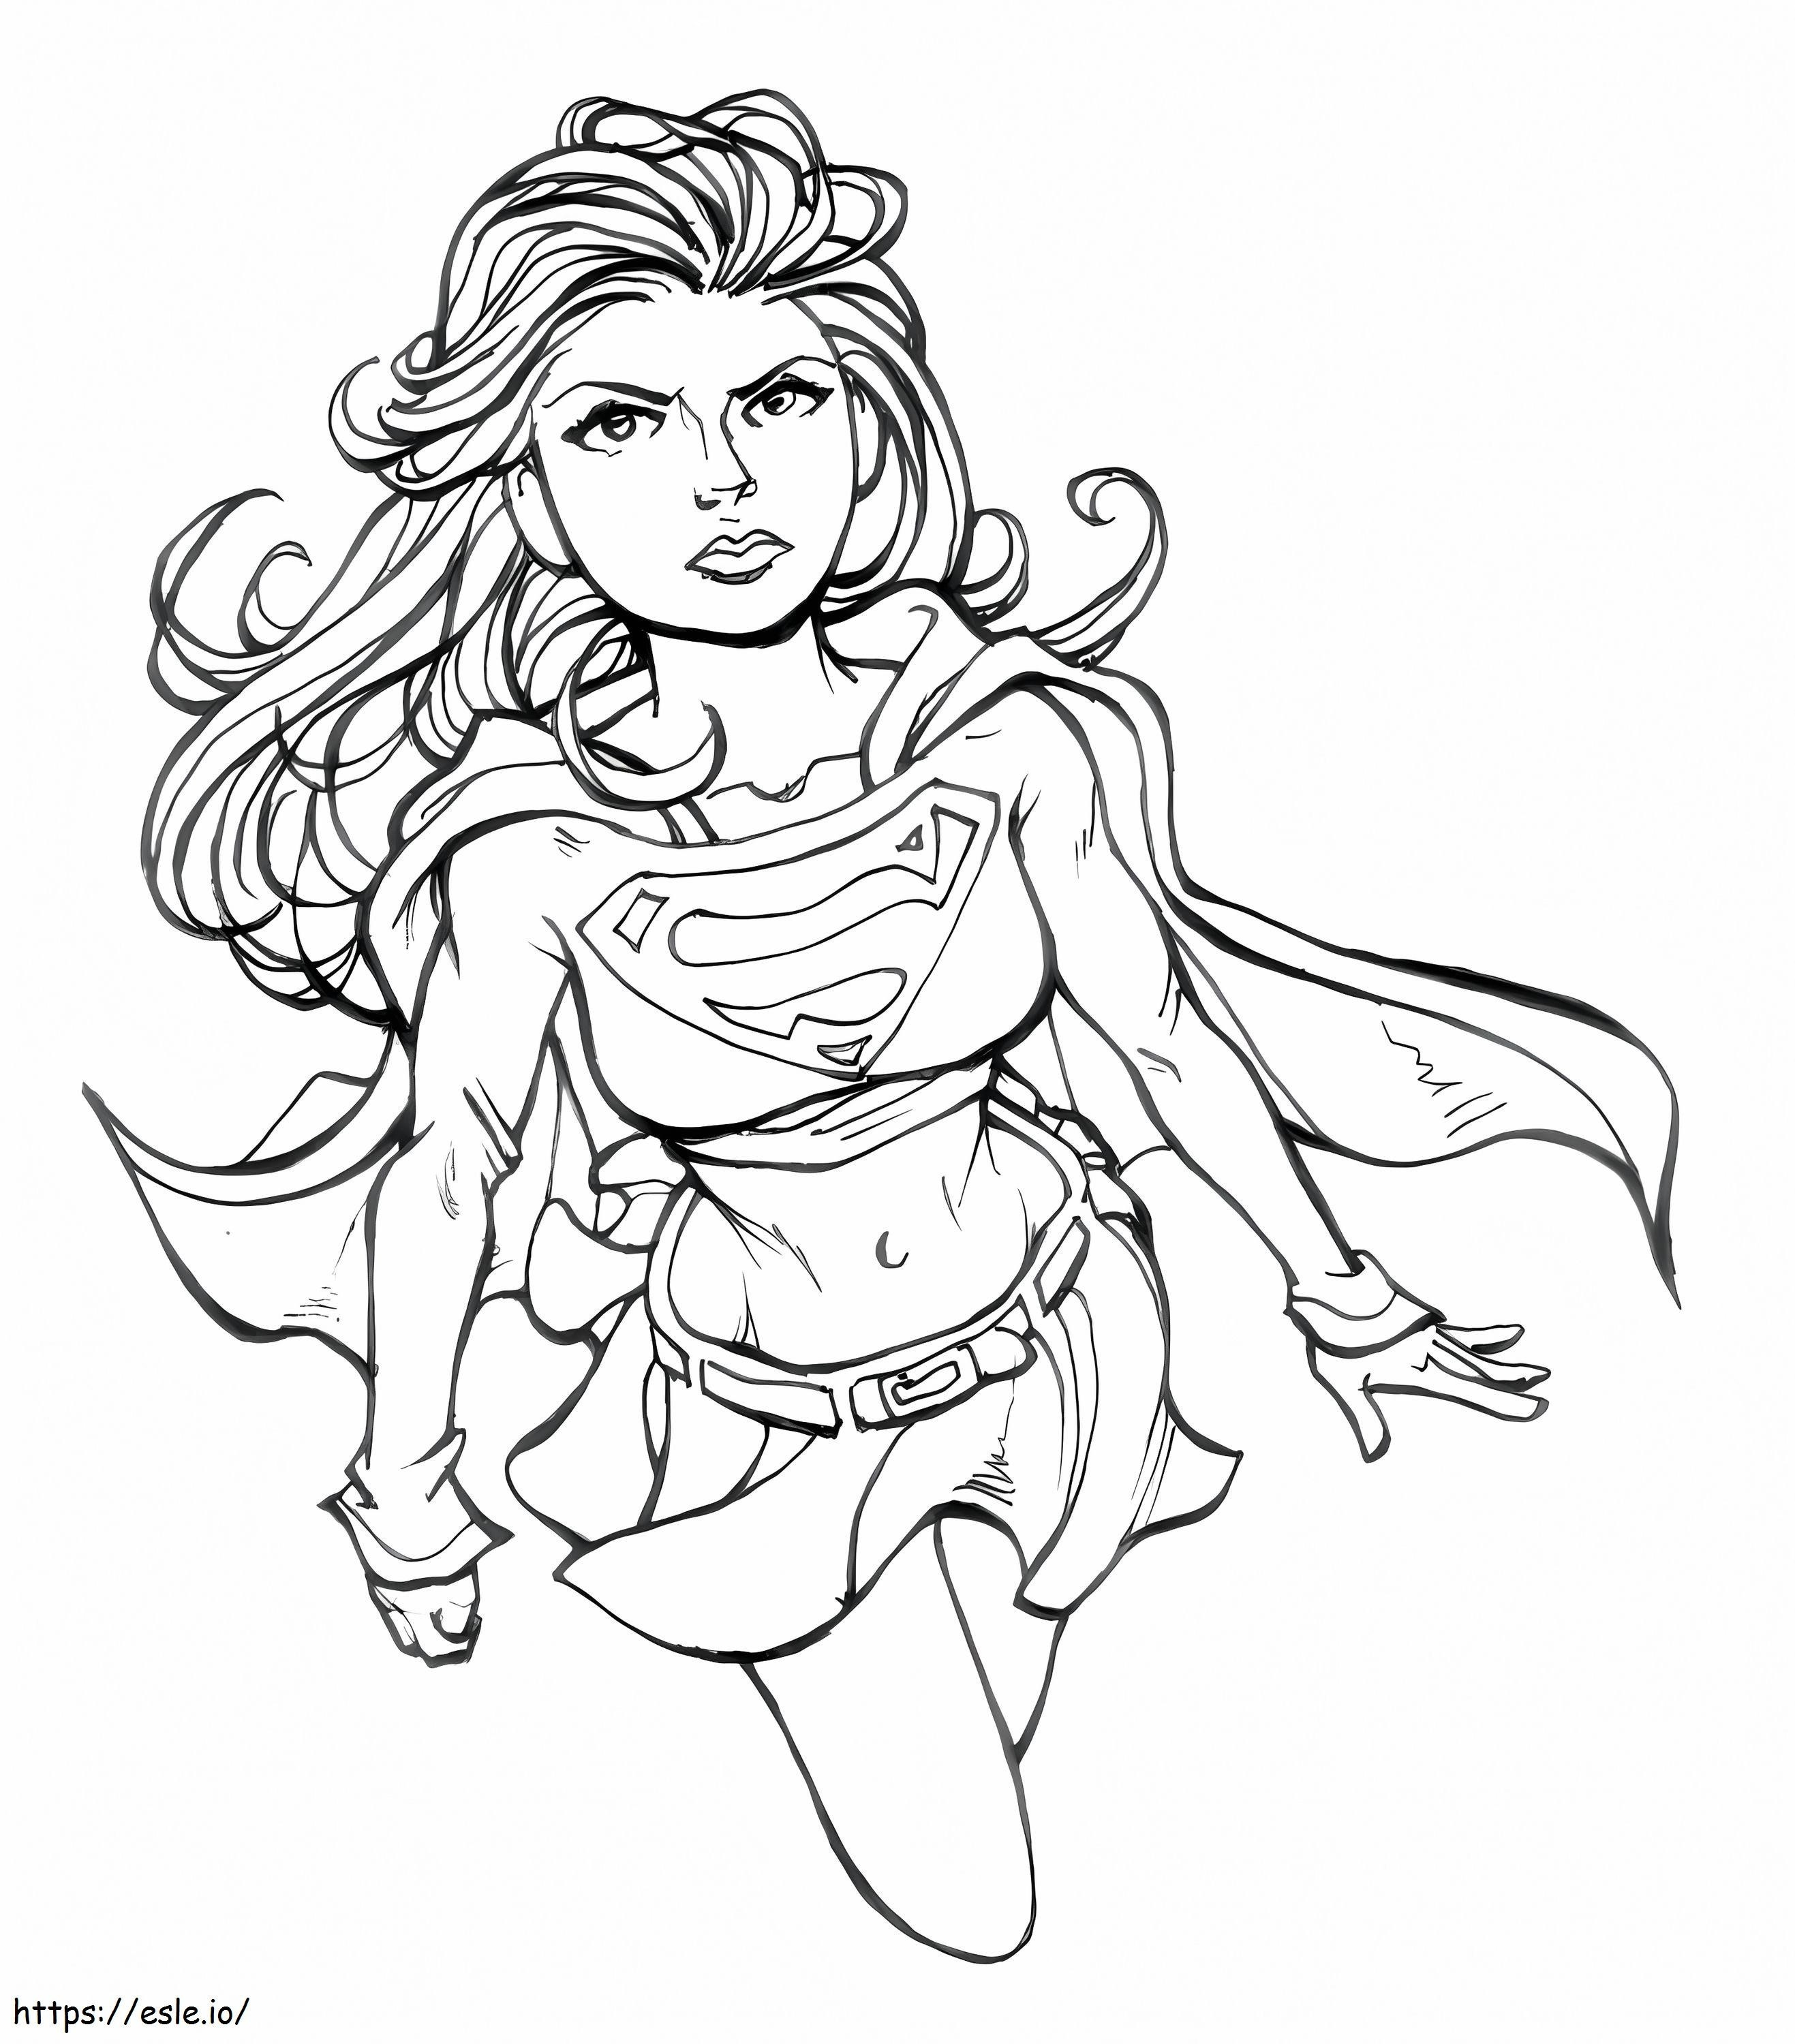 Angry Supergirl coloring page